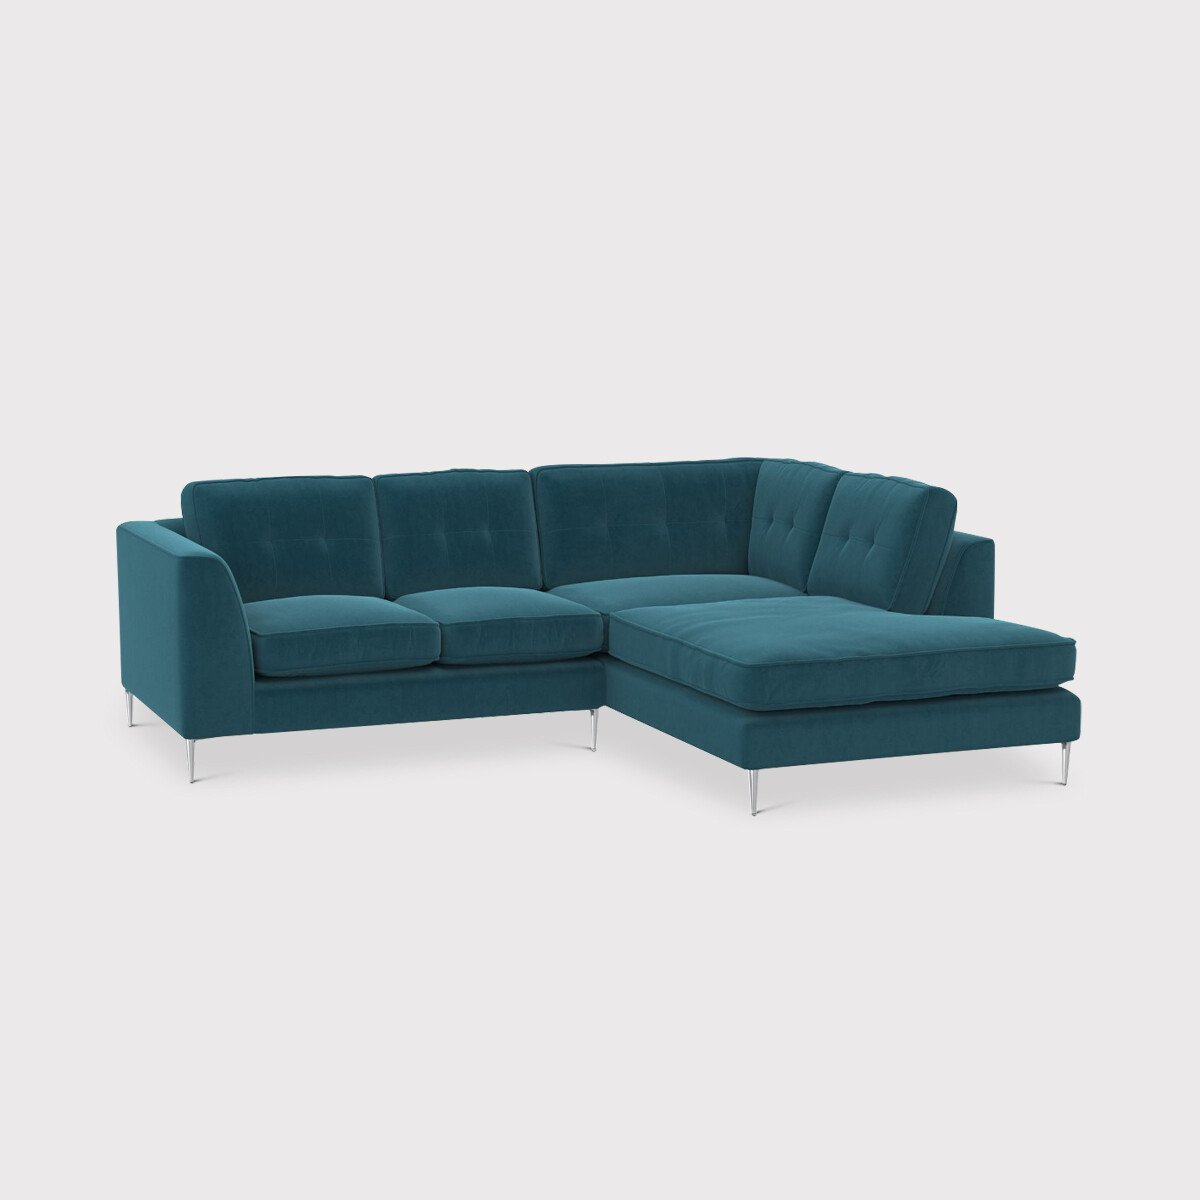 Conza Small Corner Group Left, Teal Fabric | Barker & Stonehouse